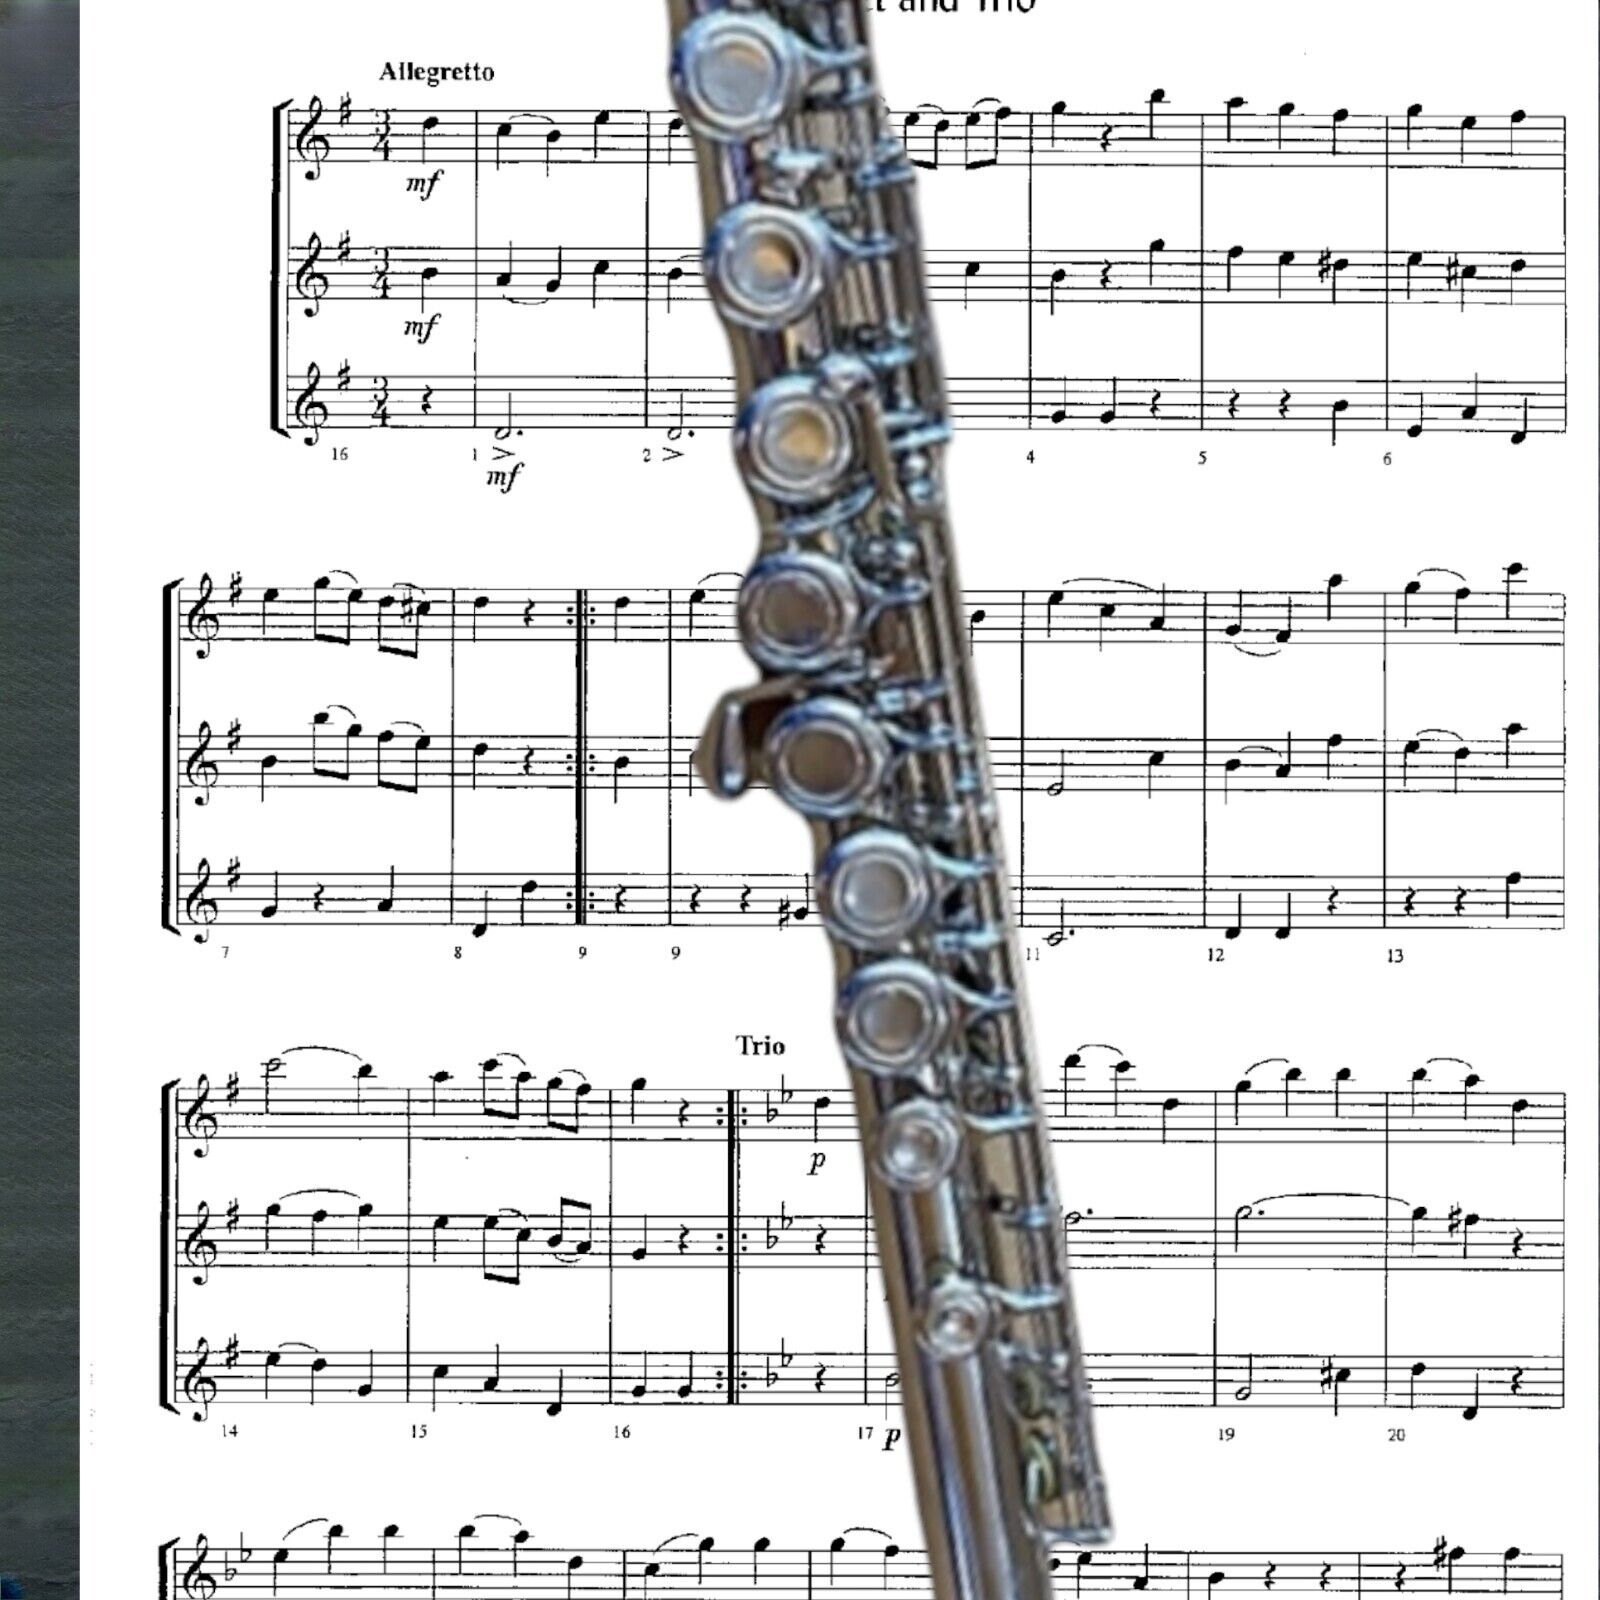 FLUTE-NEW STUDENT/ INTERMEDIATE/PRO CONCERT SILVER BAND FLUTES-WITH YAMAHA PADS MILLBROOK-with yamaha pads Does Not Apply - фотография #4